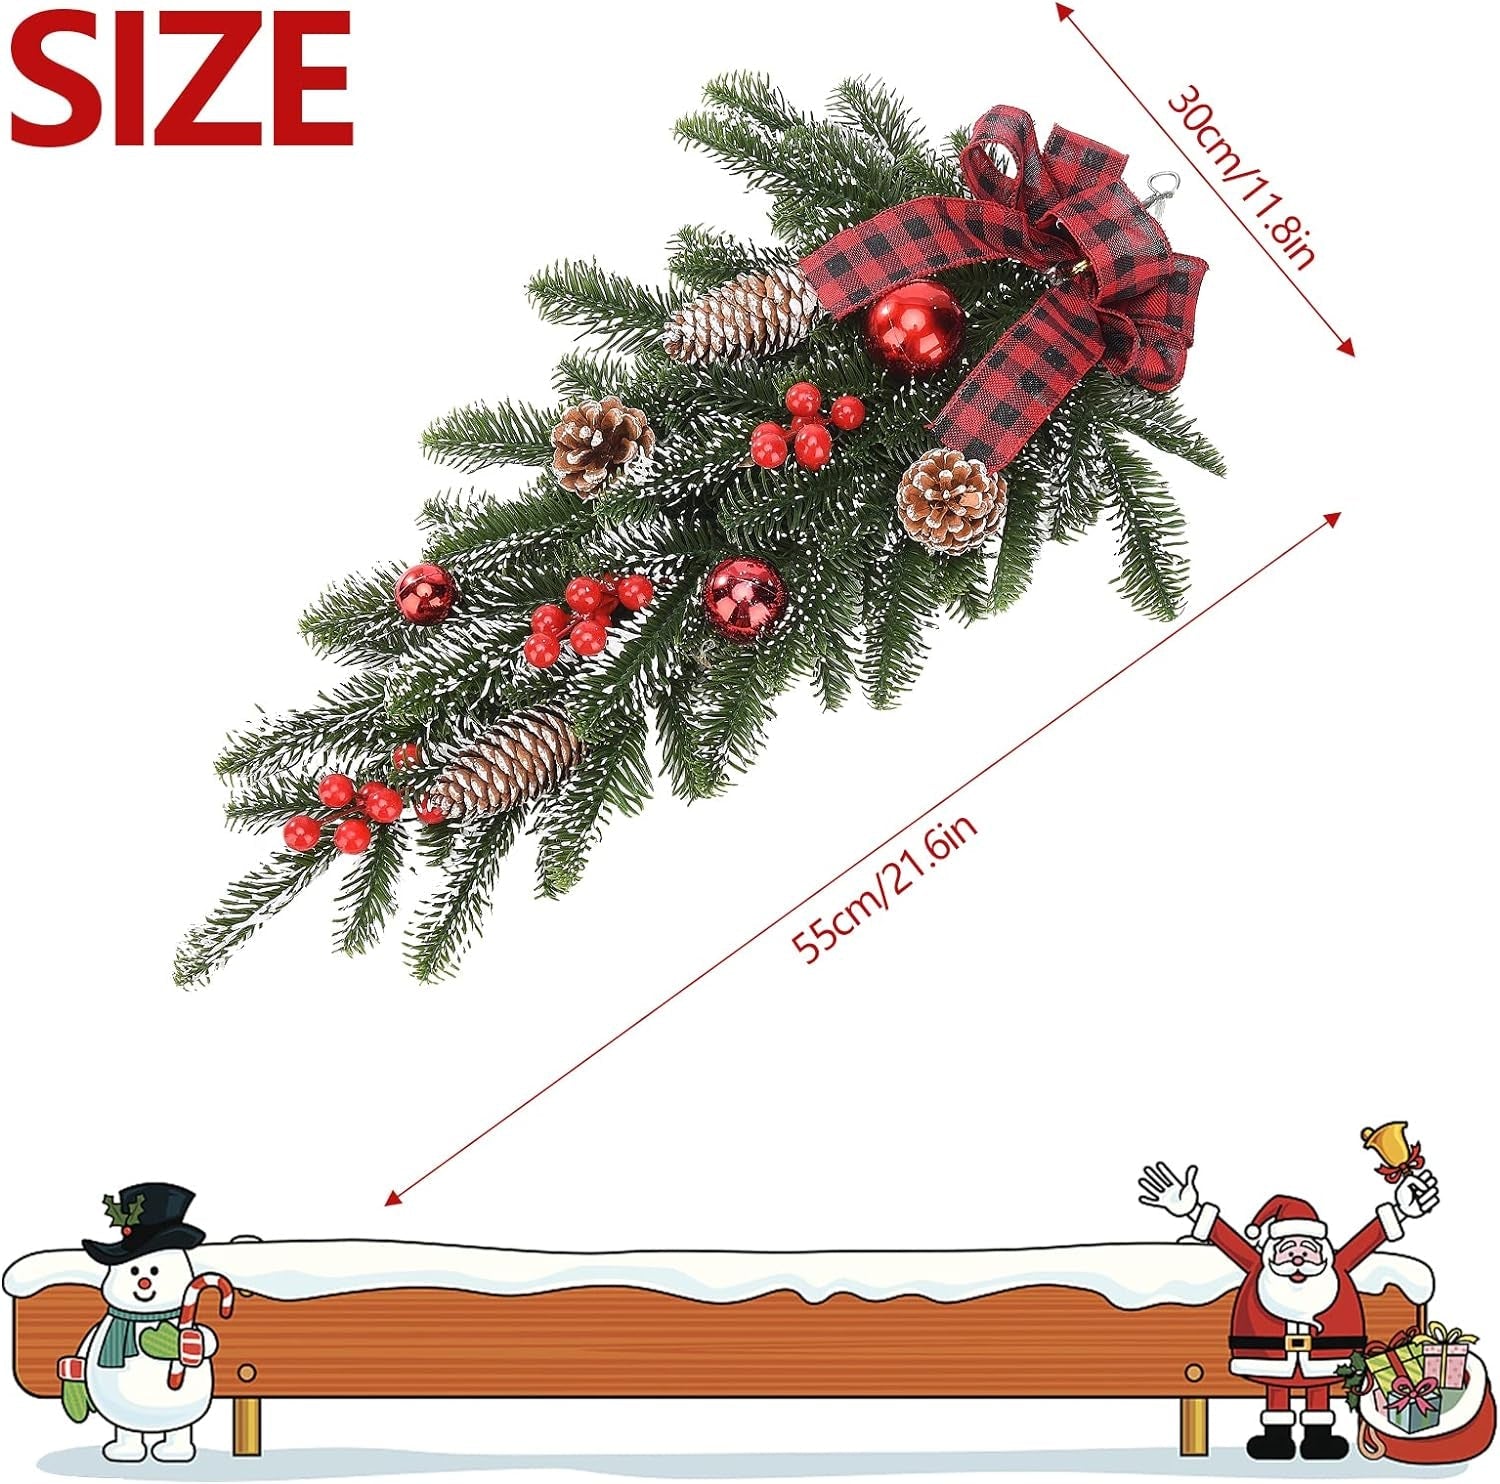 Christmas Swags for Decorating Outdoor,Garland Christmas Swag Ornament Pine Cone Decorative Props Pendant Wall Hanging Simulation Flower for Indoor Outdoor Wall Door Hanging Decor